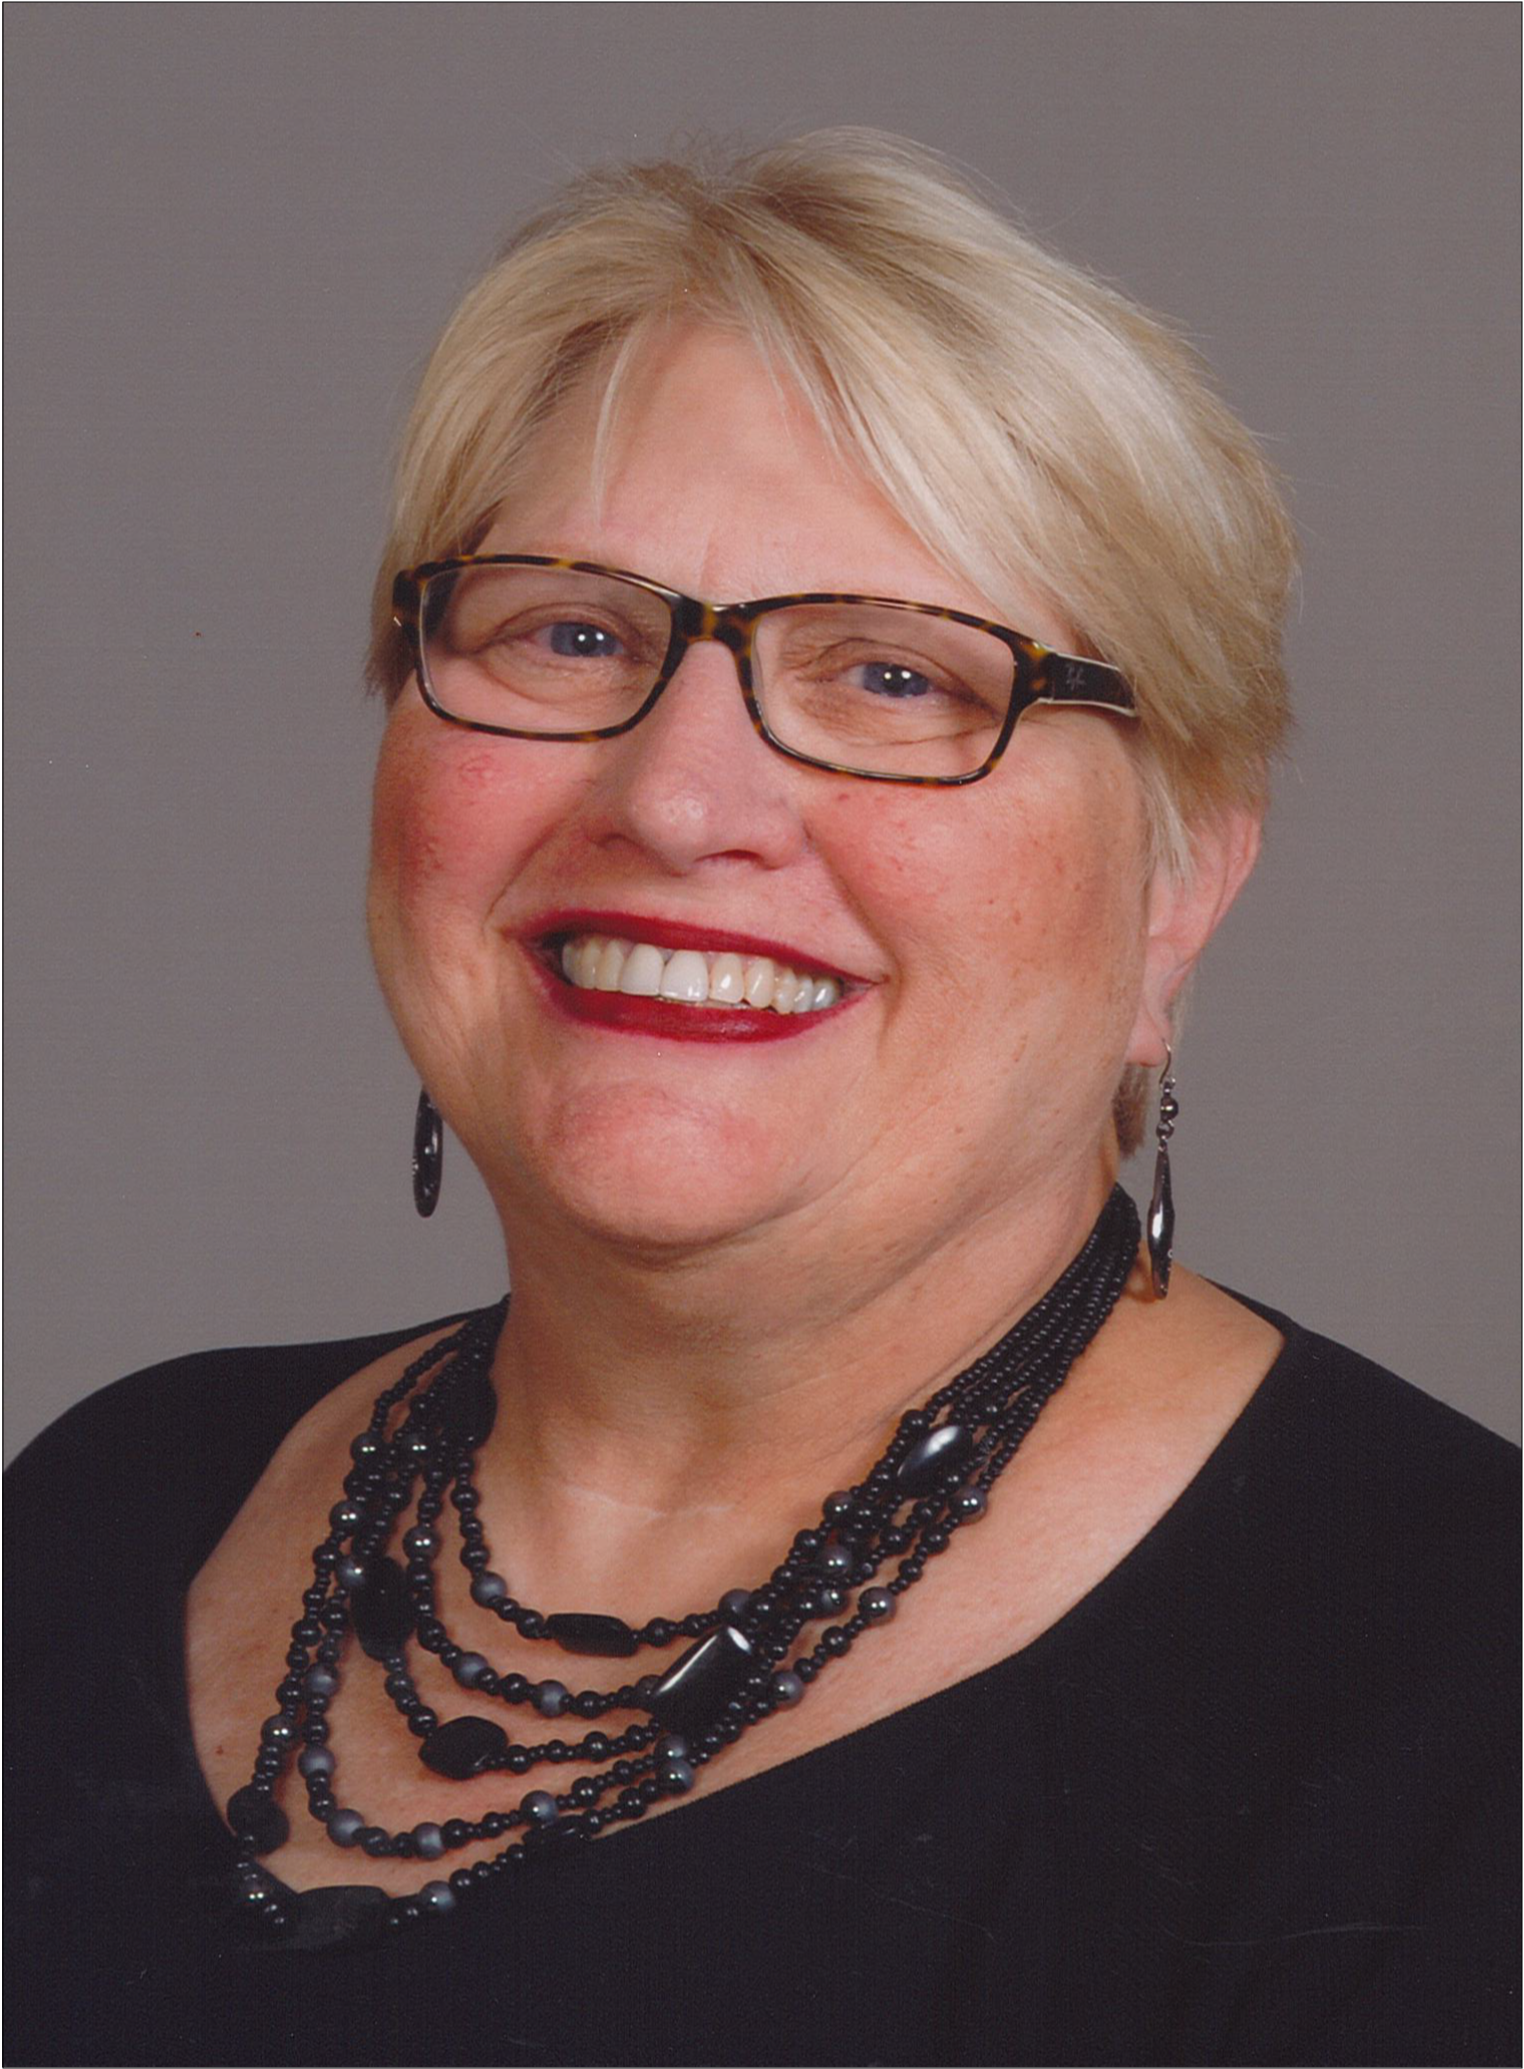 photo of accompanist Joy a white woman with short blond hair and glasses wearing a black shirt and black necklaces